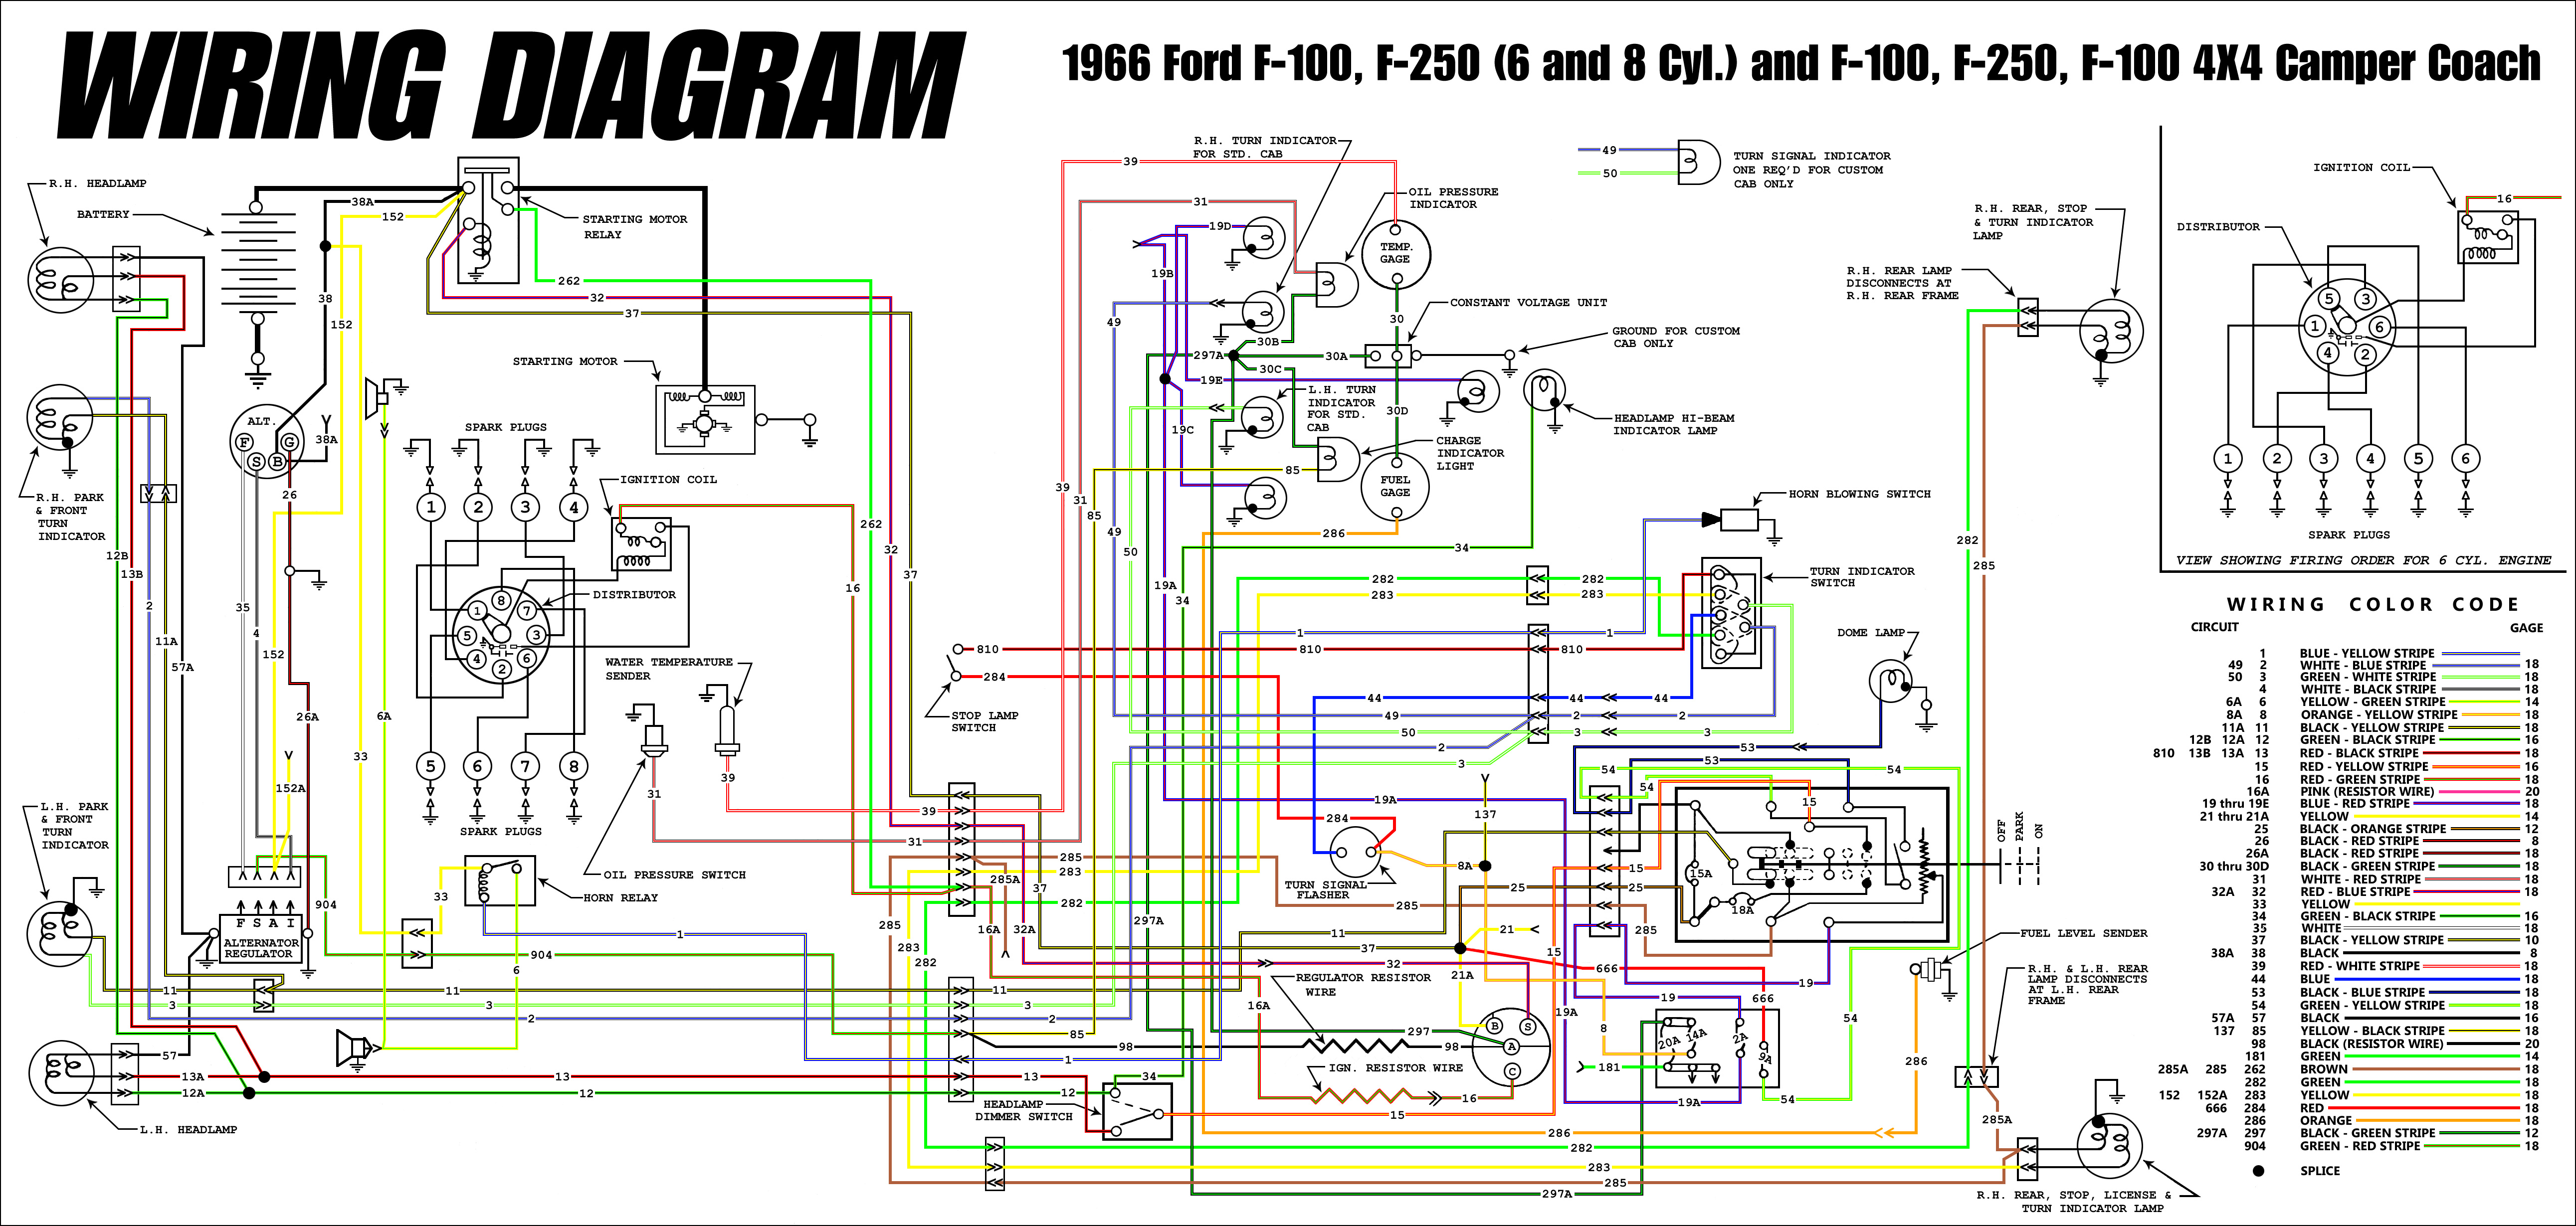 Wiring Diagram For Ford Pickup from www.fordification.info